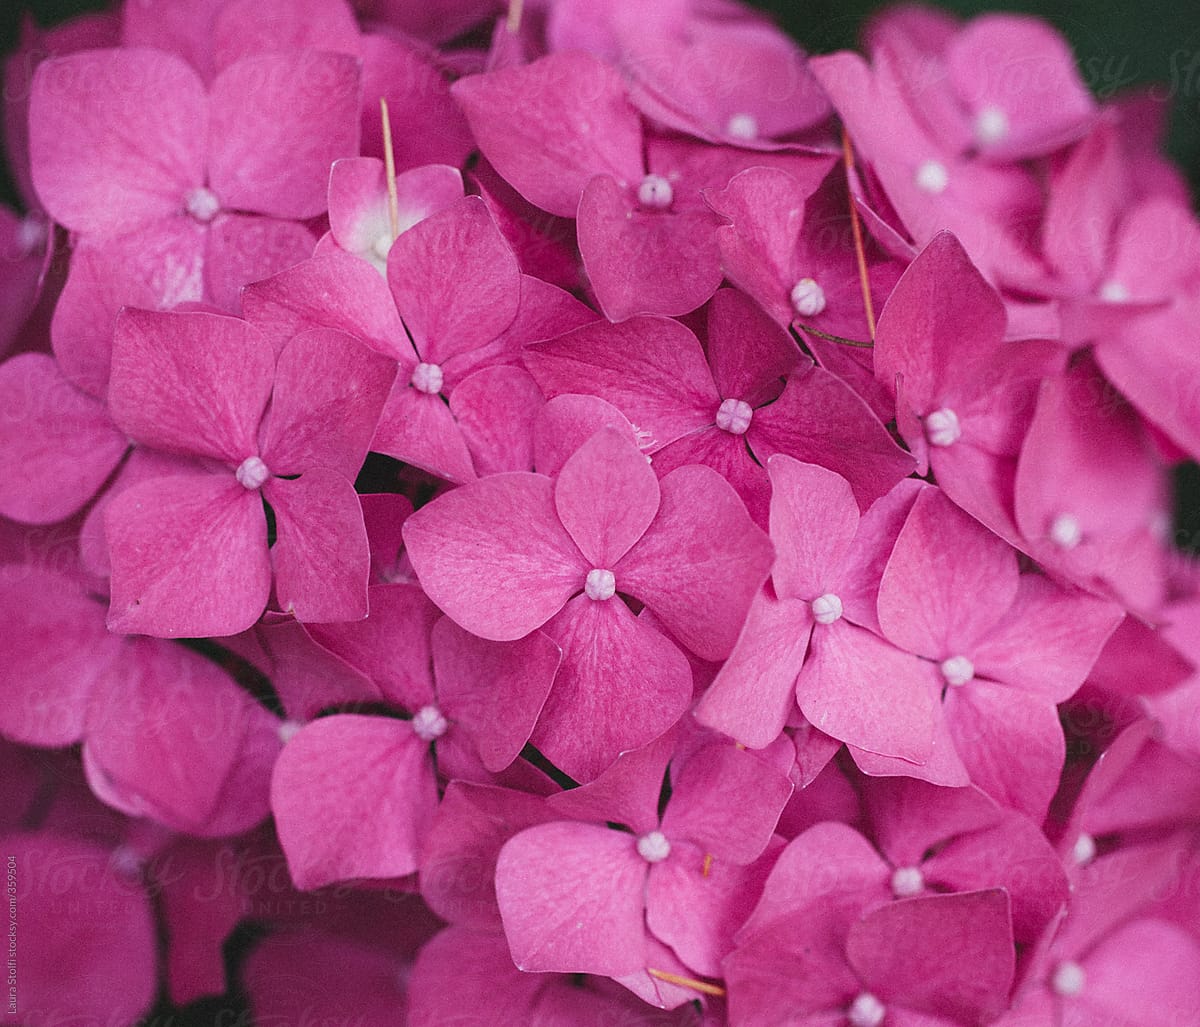 Extreme close up of pink Hydrangea cluster flower